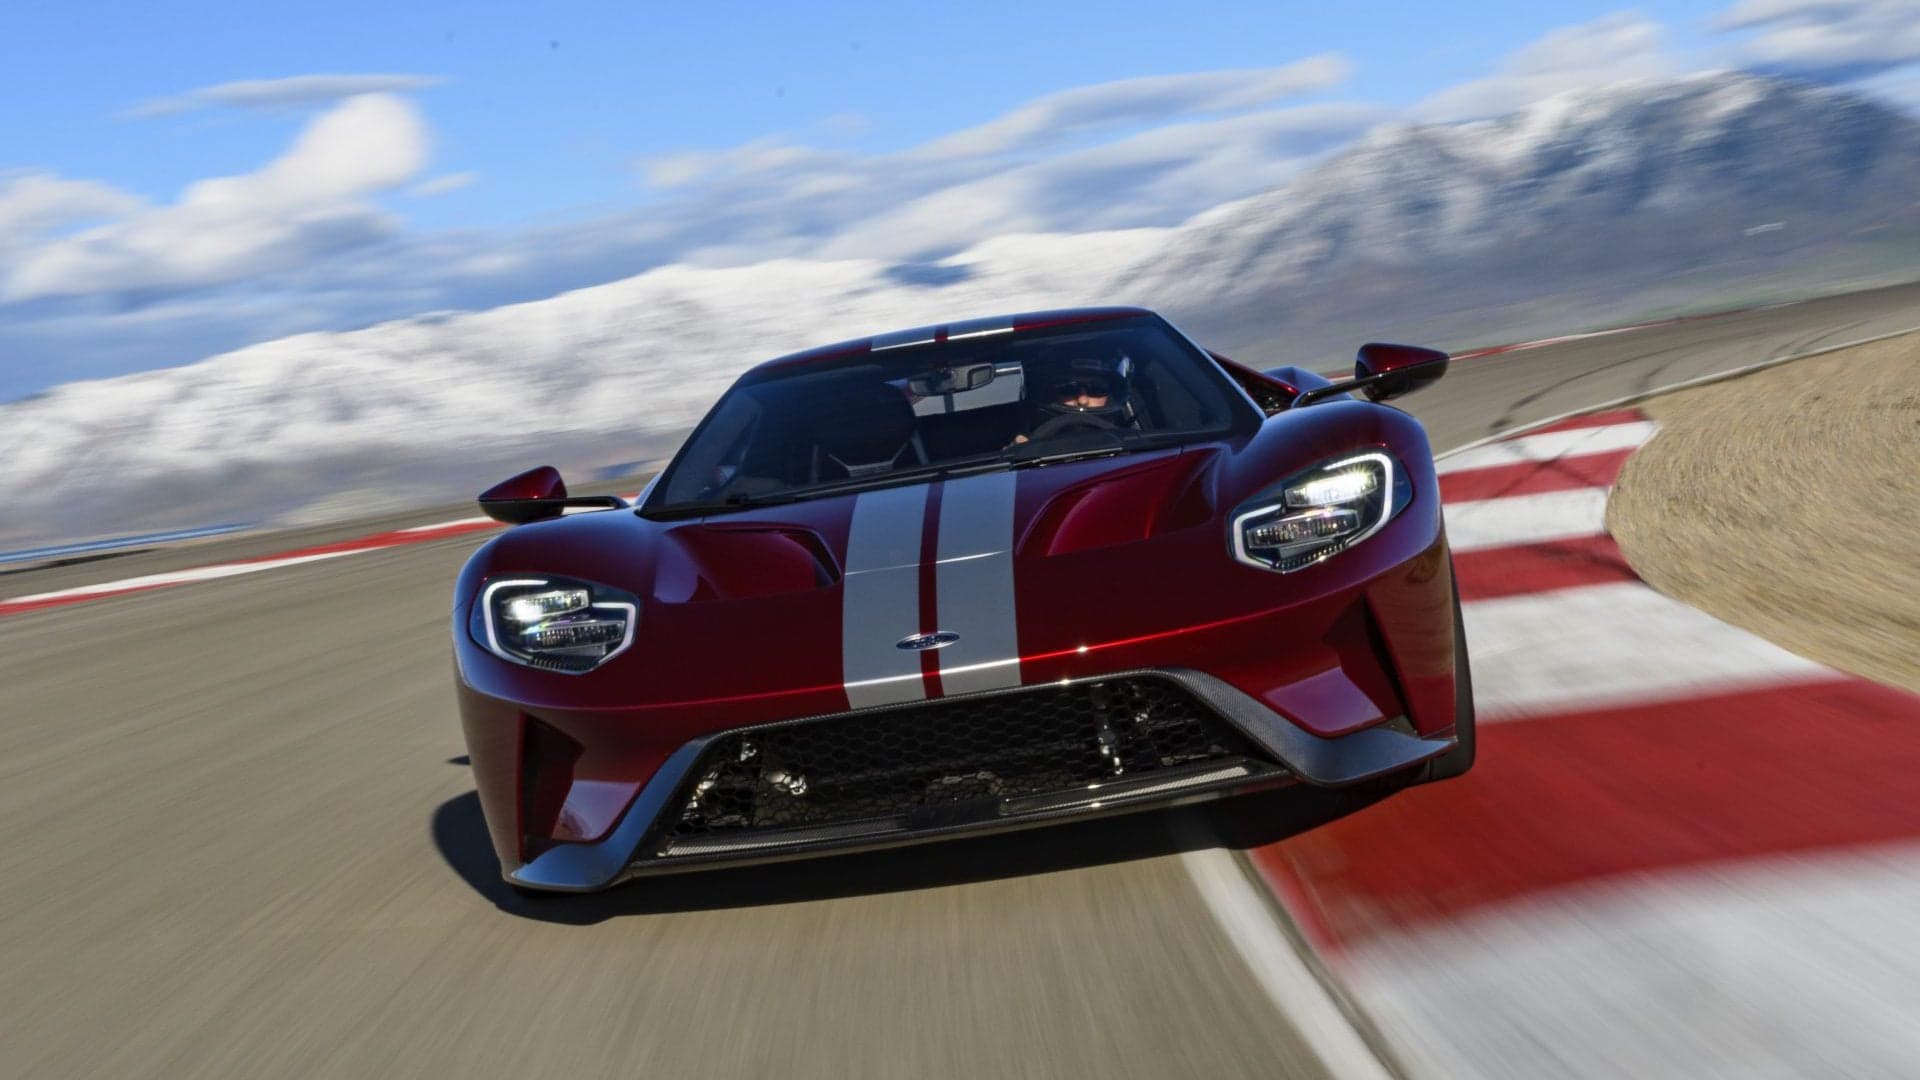 Exclusive: Ford Hints It’s ‘Not Done’ With the Ford GT’s Performance